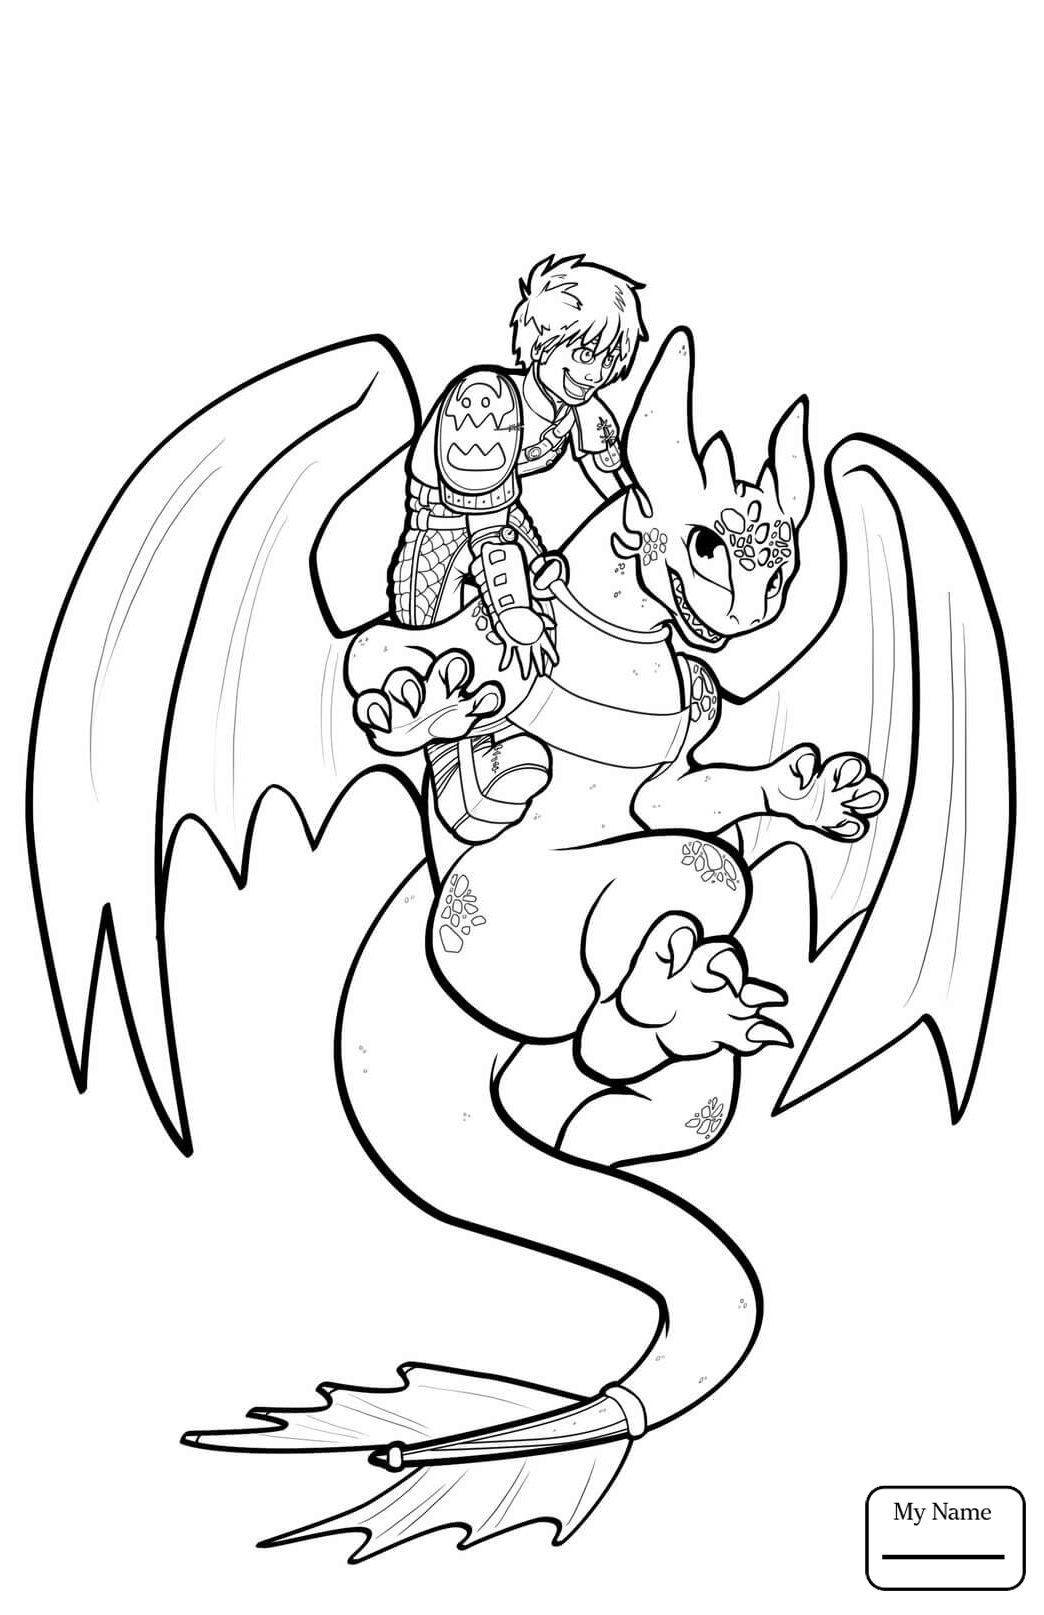 coloring books : How To Train Your Dragon Coloring Pages Best Of ...